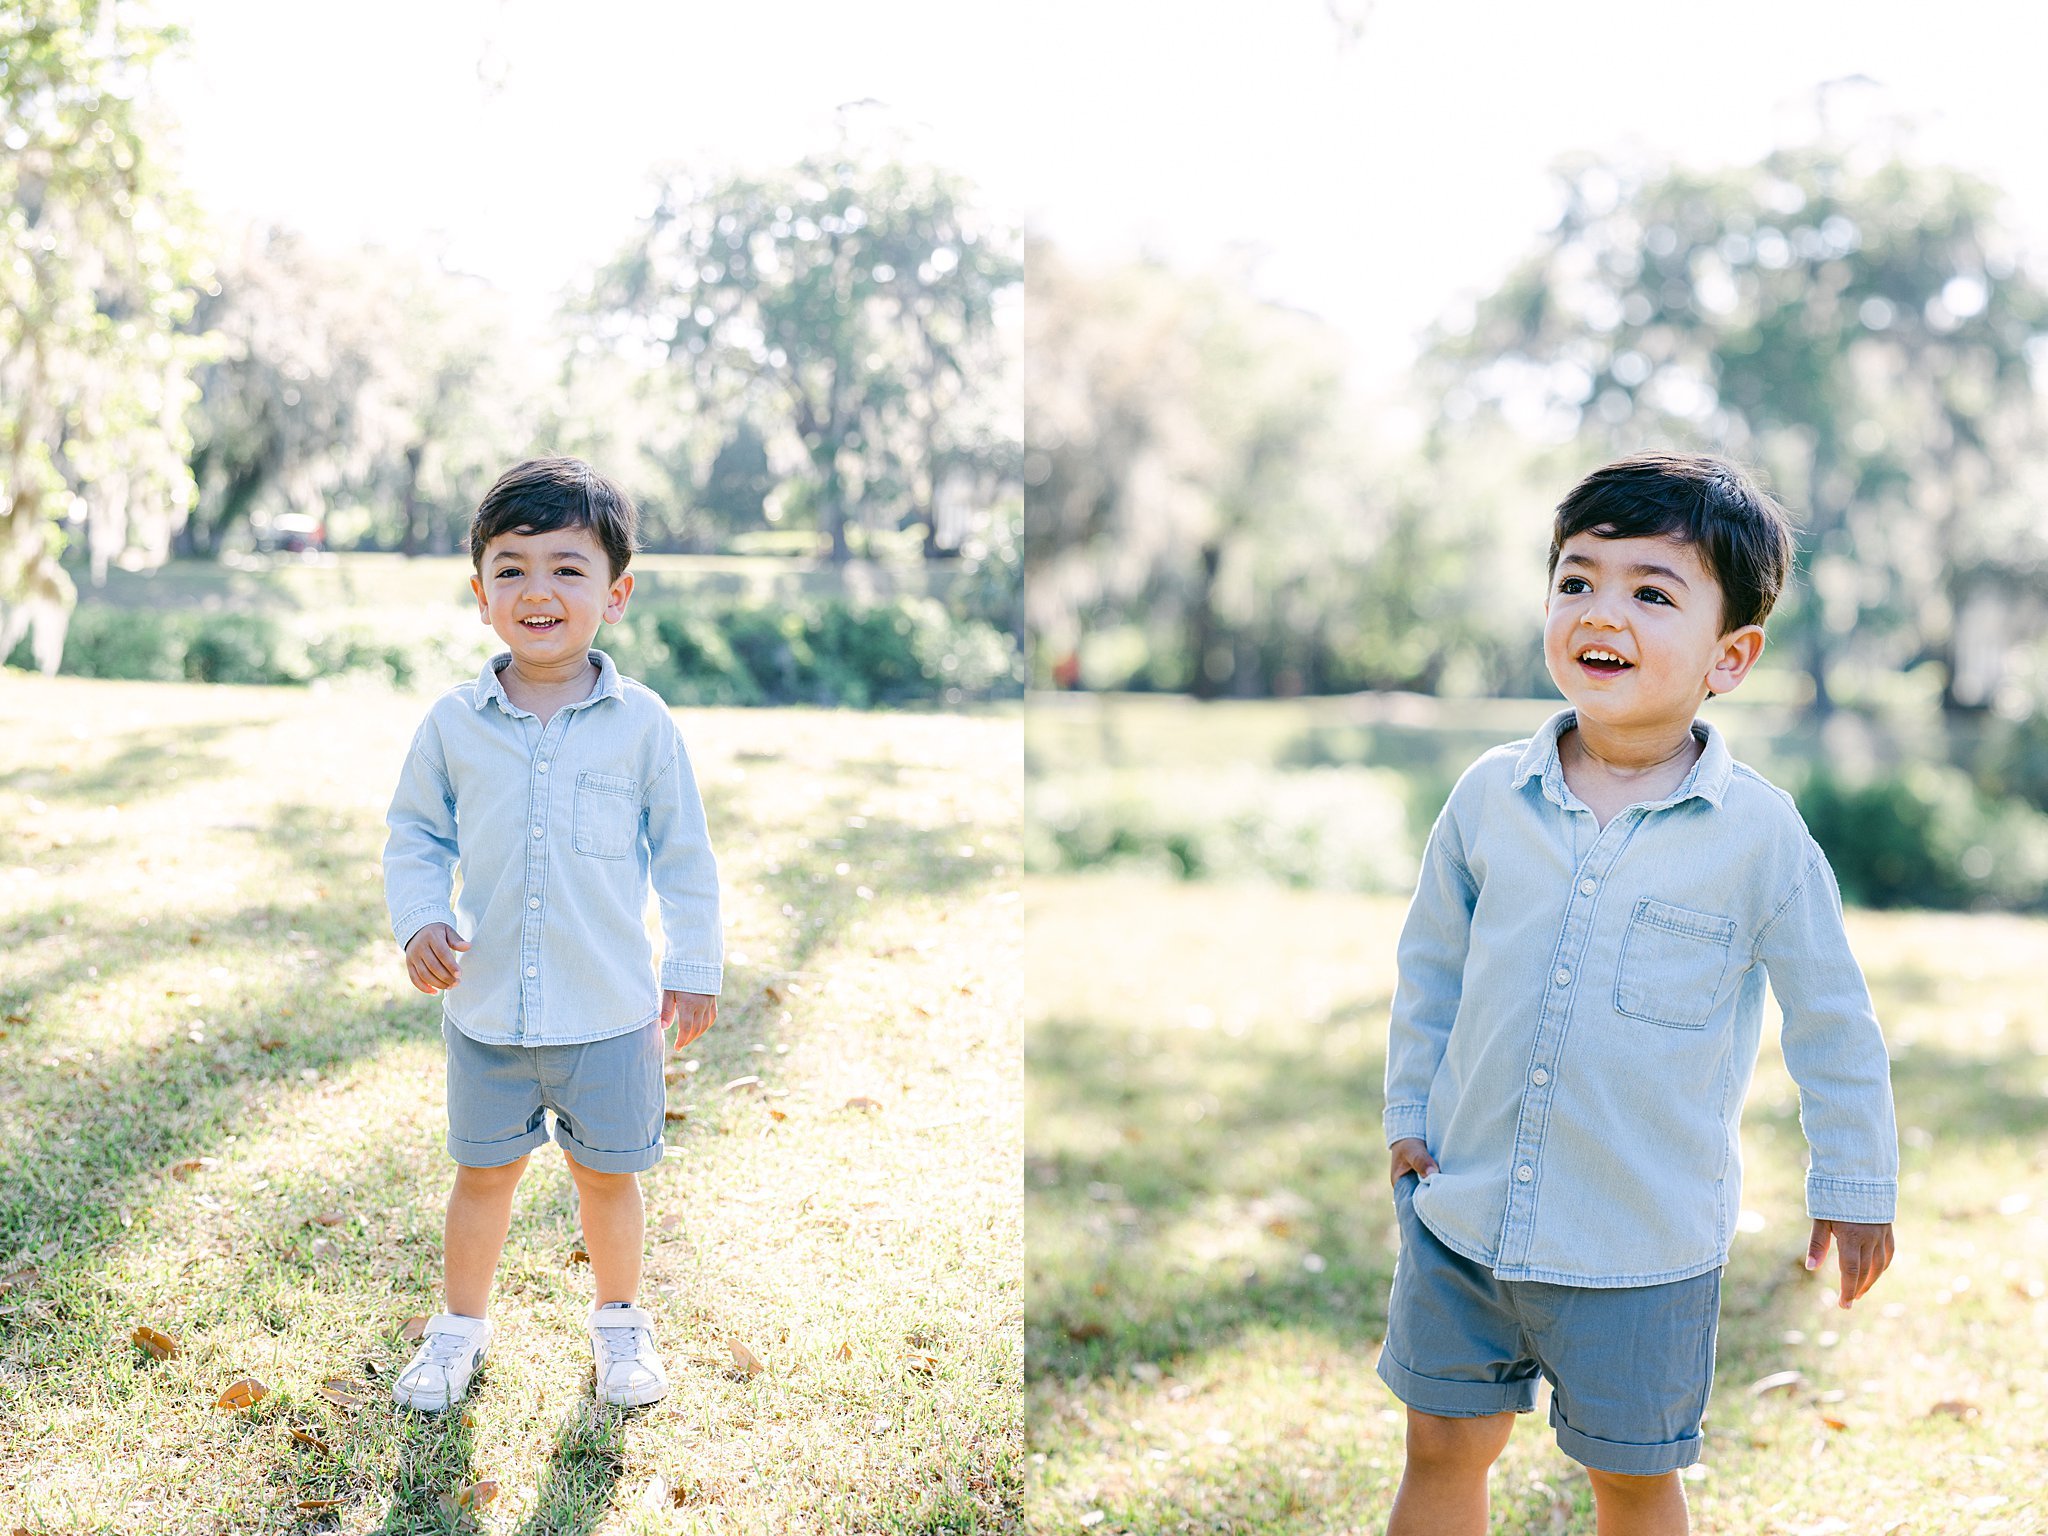 Katherine_Ives_Photography_Montage_Palmetto_Bluff_Family_Session_76767.JPG